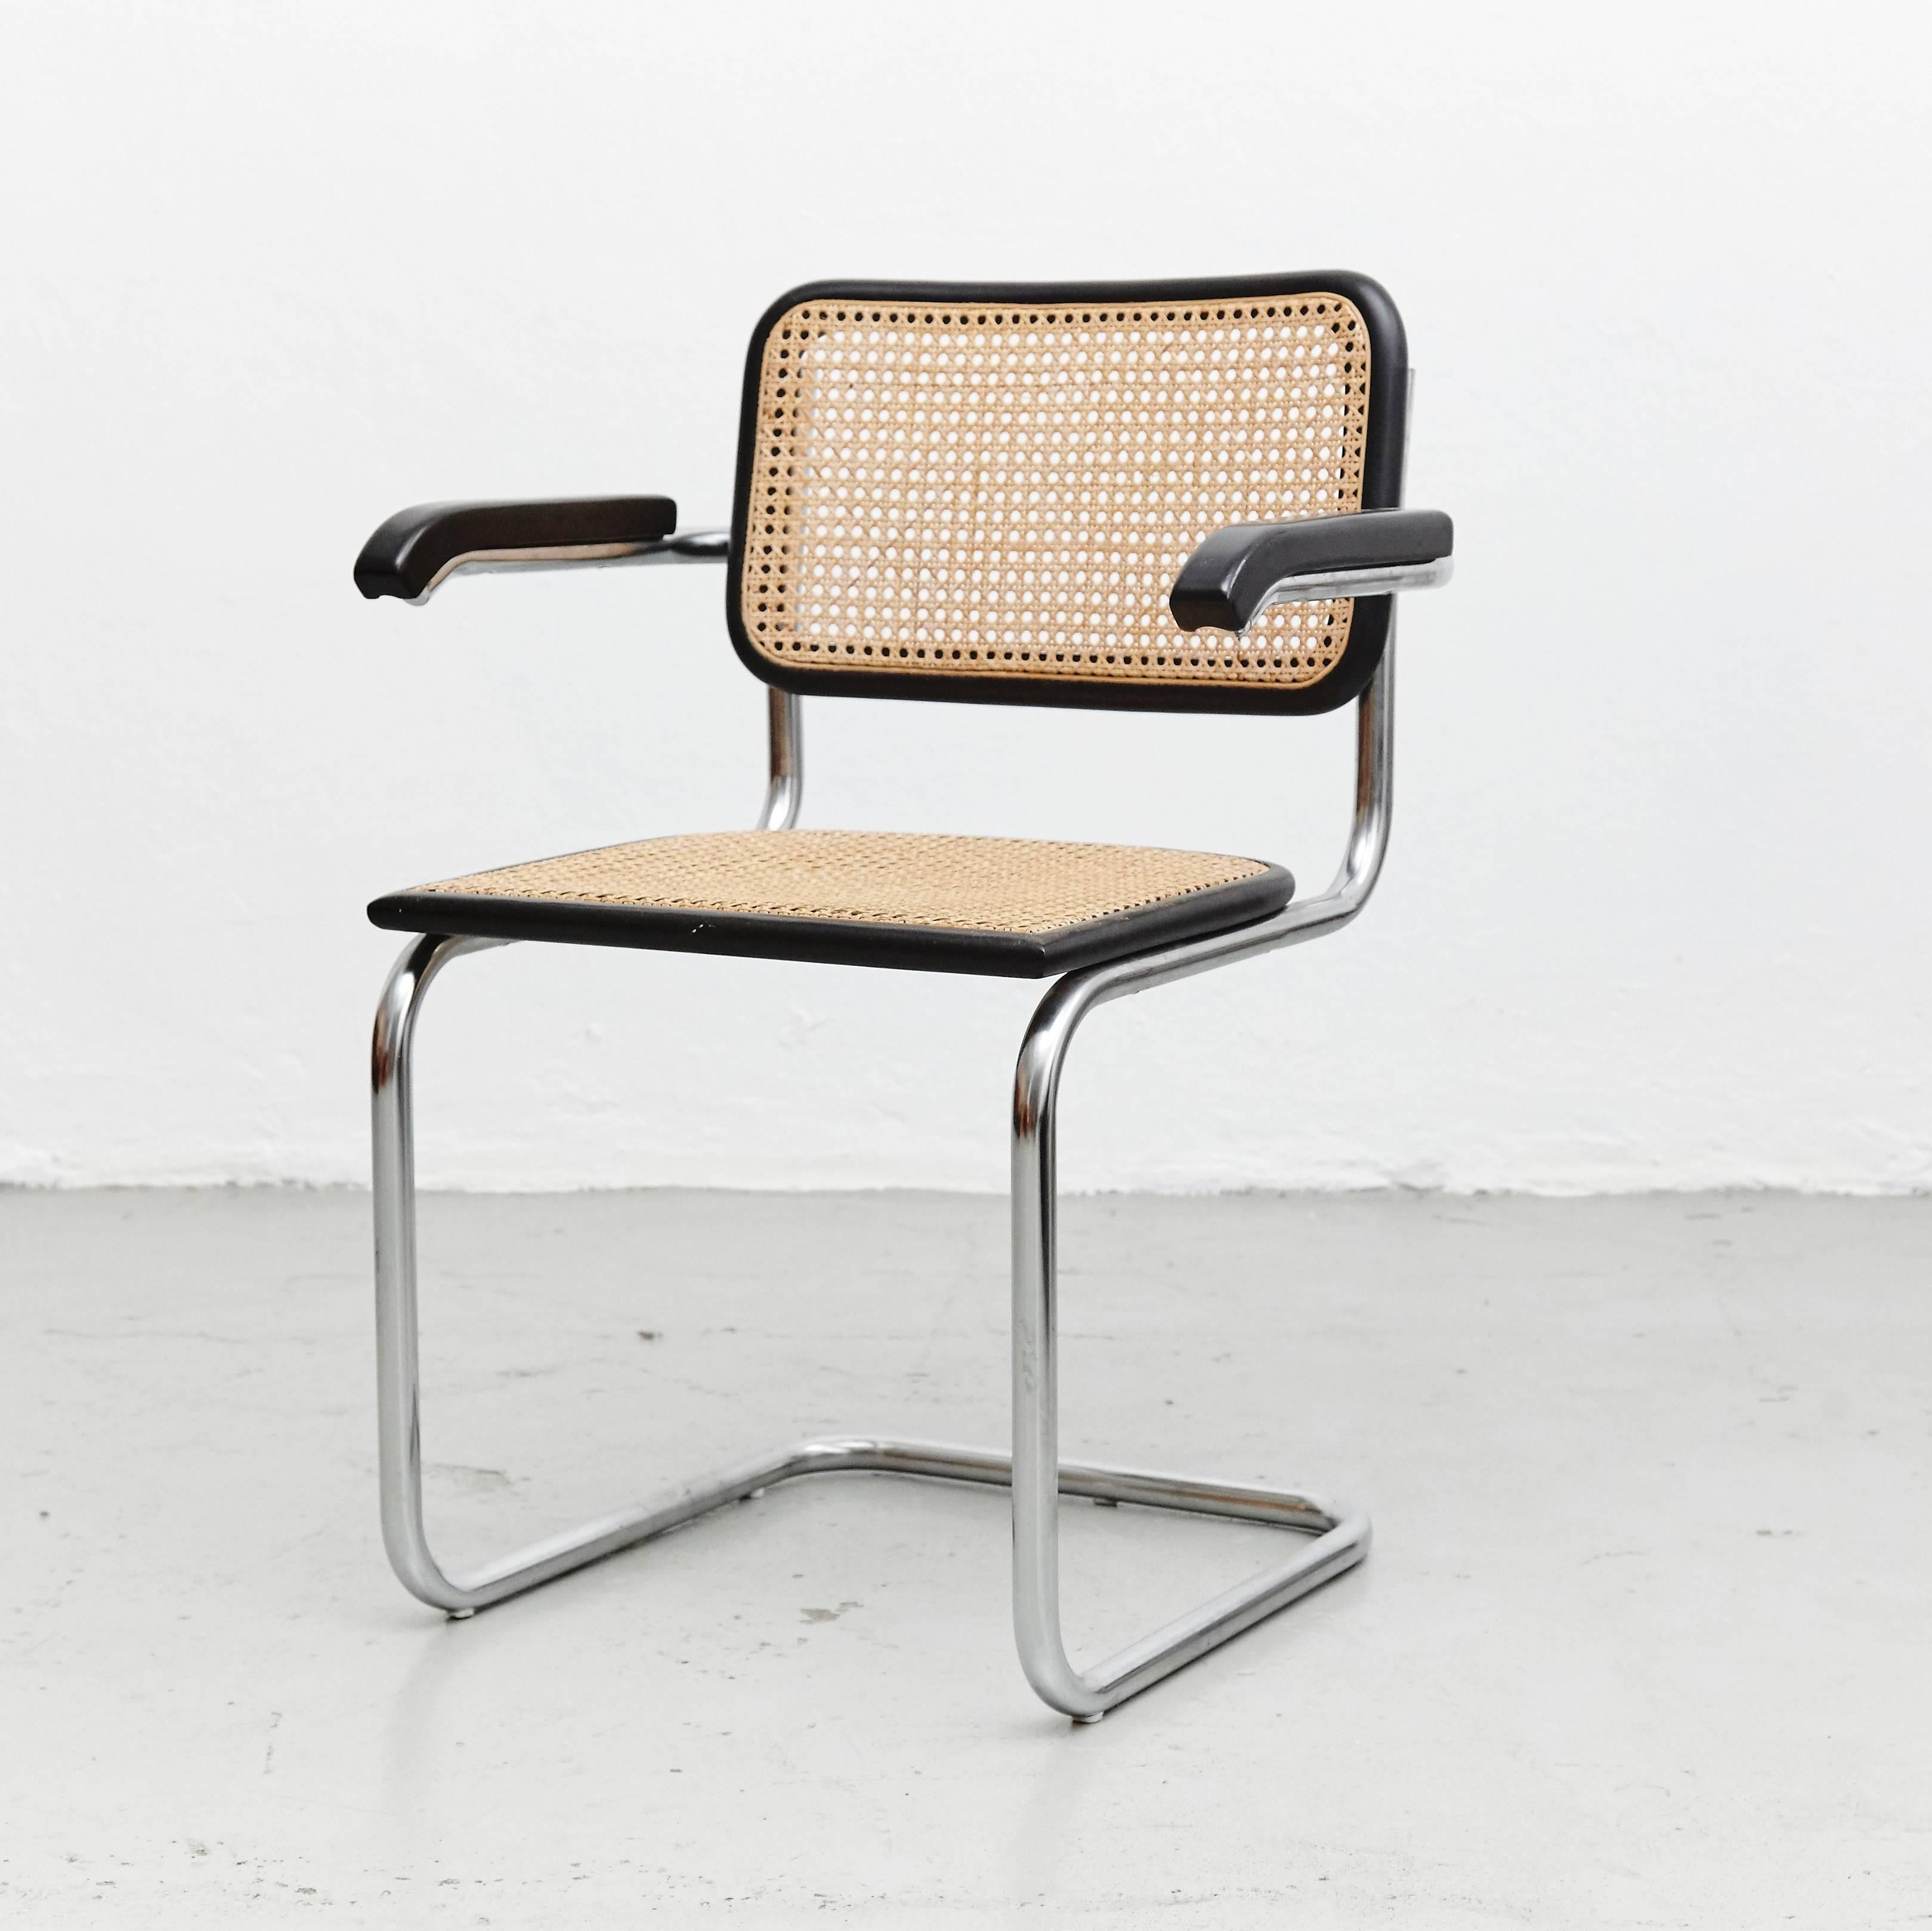 Chairs, model Cesca, designed by Marcel Breuer.
Manufactured in Italy around 1970 by unknown manufacturer.

Metal pipe frame, wood seat and back structure and rattan.

In good original condition, with minor wear consistent with age and use,